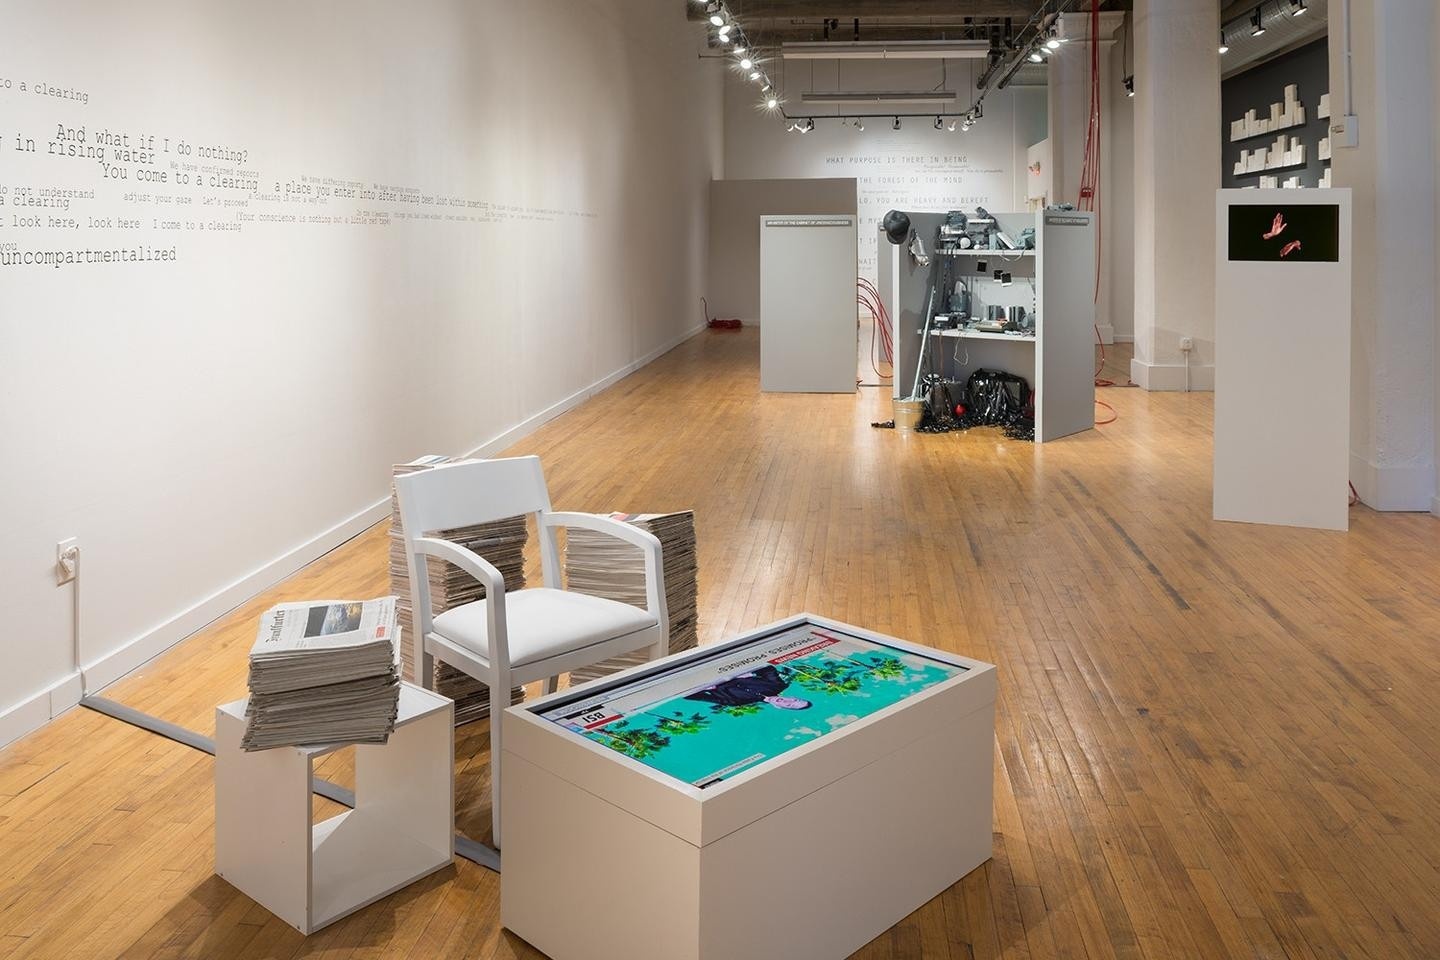 A multimedia exhibition in a large gallery space with high ceilings and wood floors. A "text cloud" is affixed to the walls in vinyl lettering. In the foreground, a white chair and side table are surrounded by tall stacks of newspapers. A video monitor is embedded int he coffee table. In the background, there is an arrangement of grey cubicles, a second video monitor, and a grey wall lined with neat arrangements of white cubes.